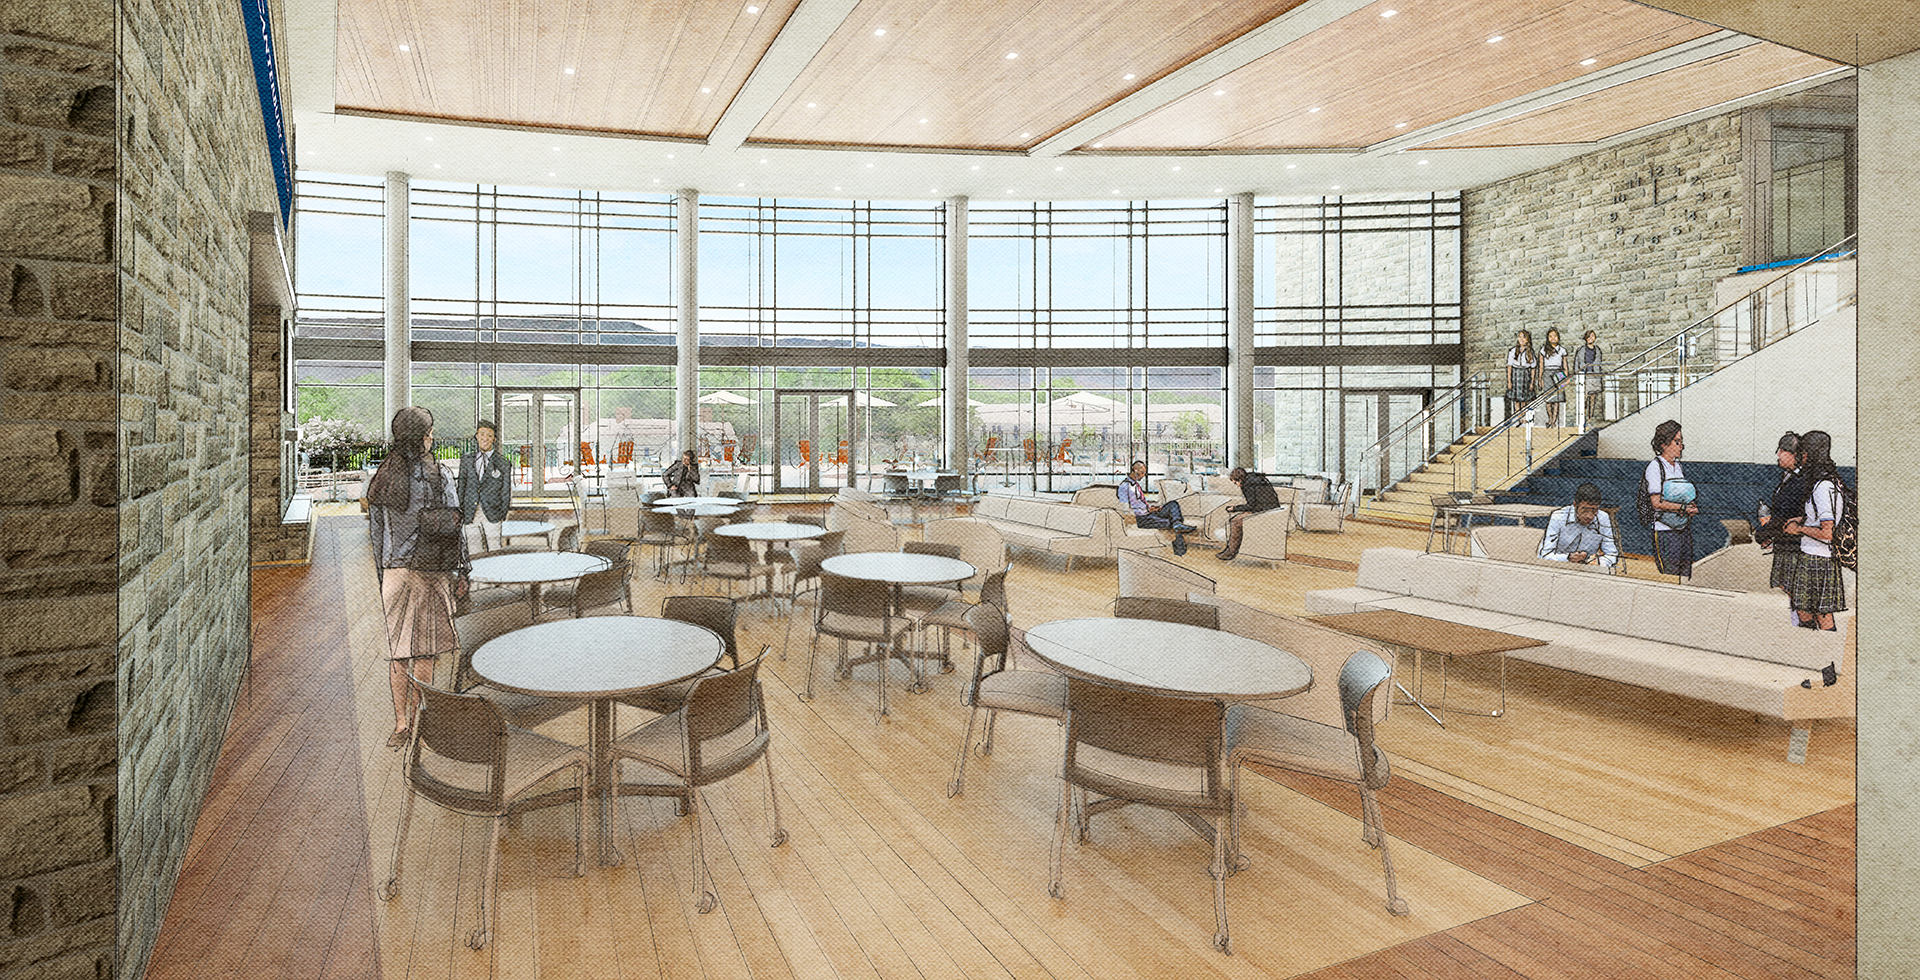 <p>The expansive interior glass walls of the Commons brings abundant natural light into the space and opens up dramatic views to the Housatonic Range and beyond.</p>
